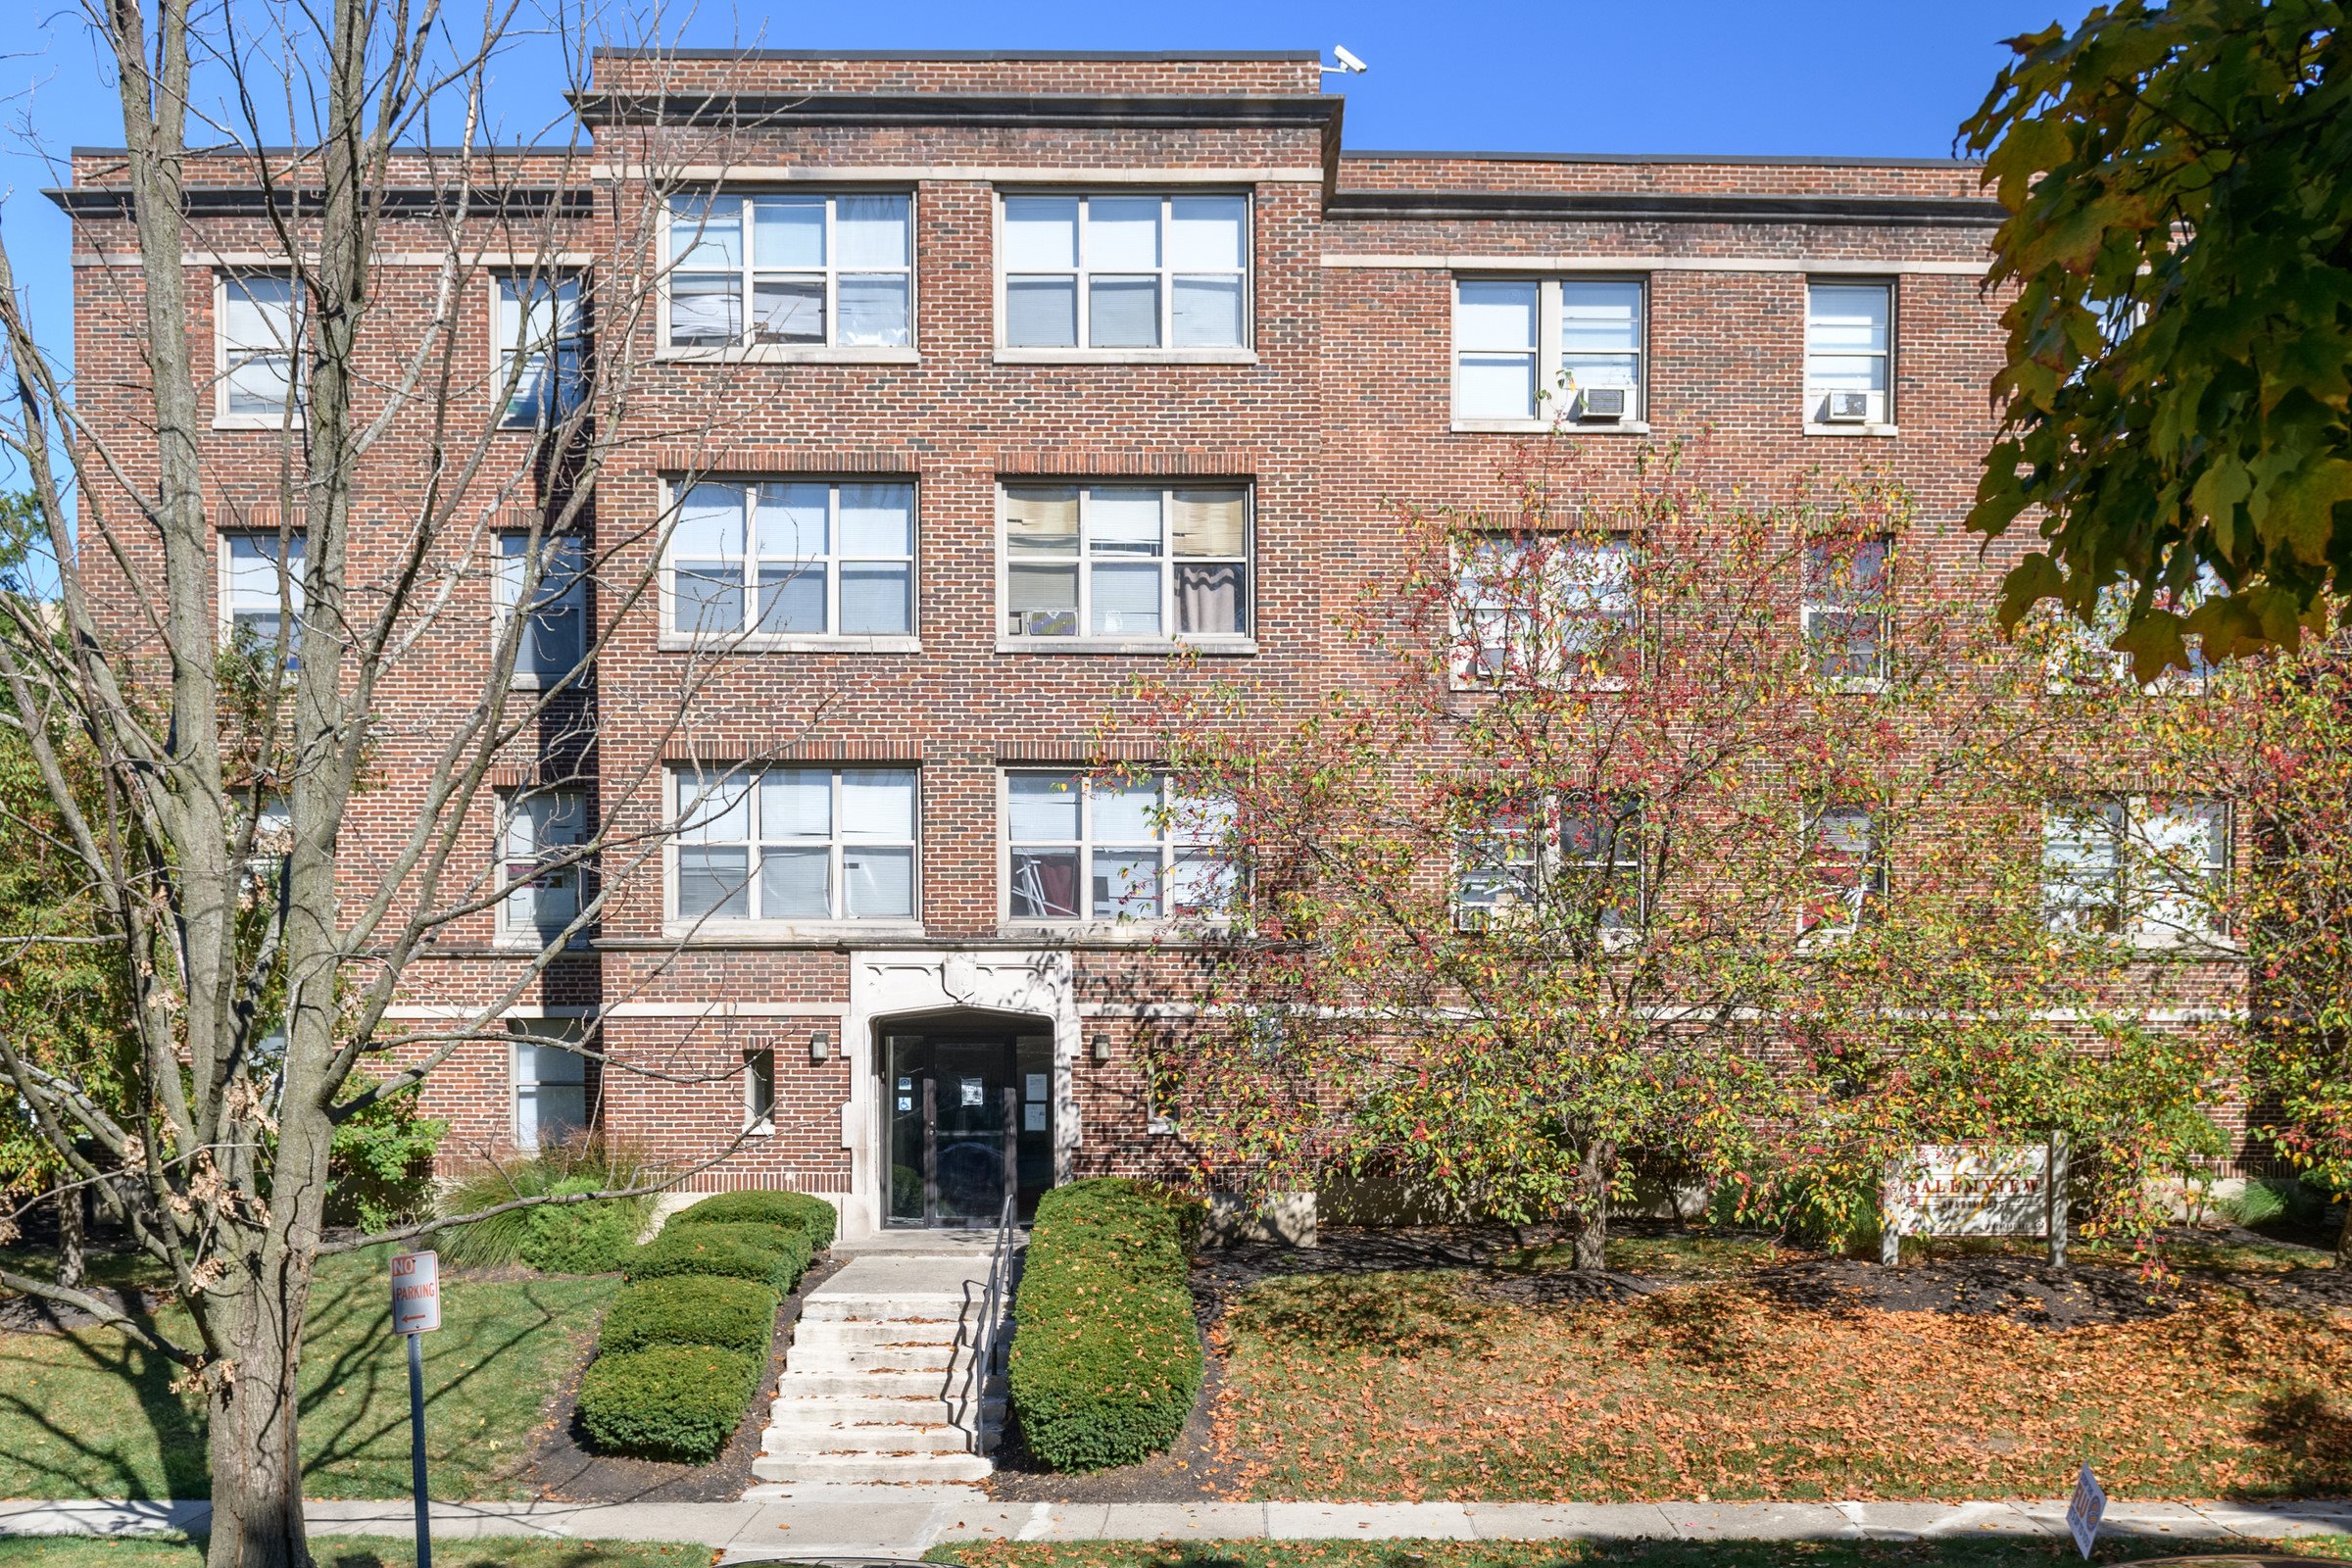 Salemview Apartments - Low Income